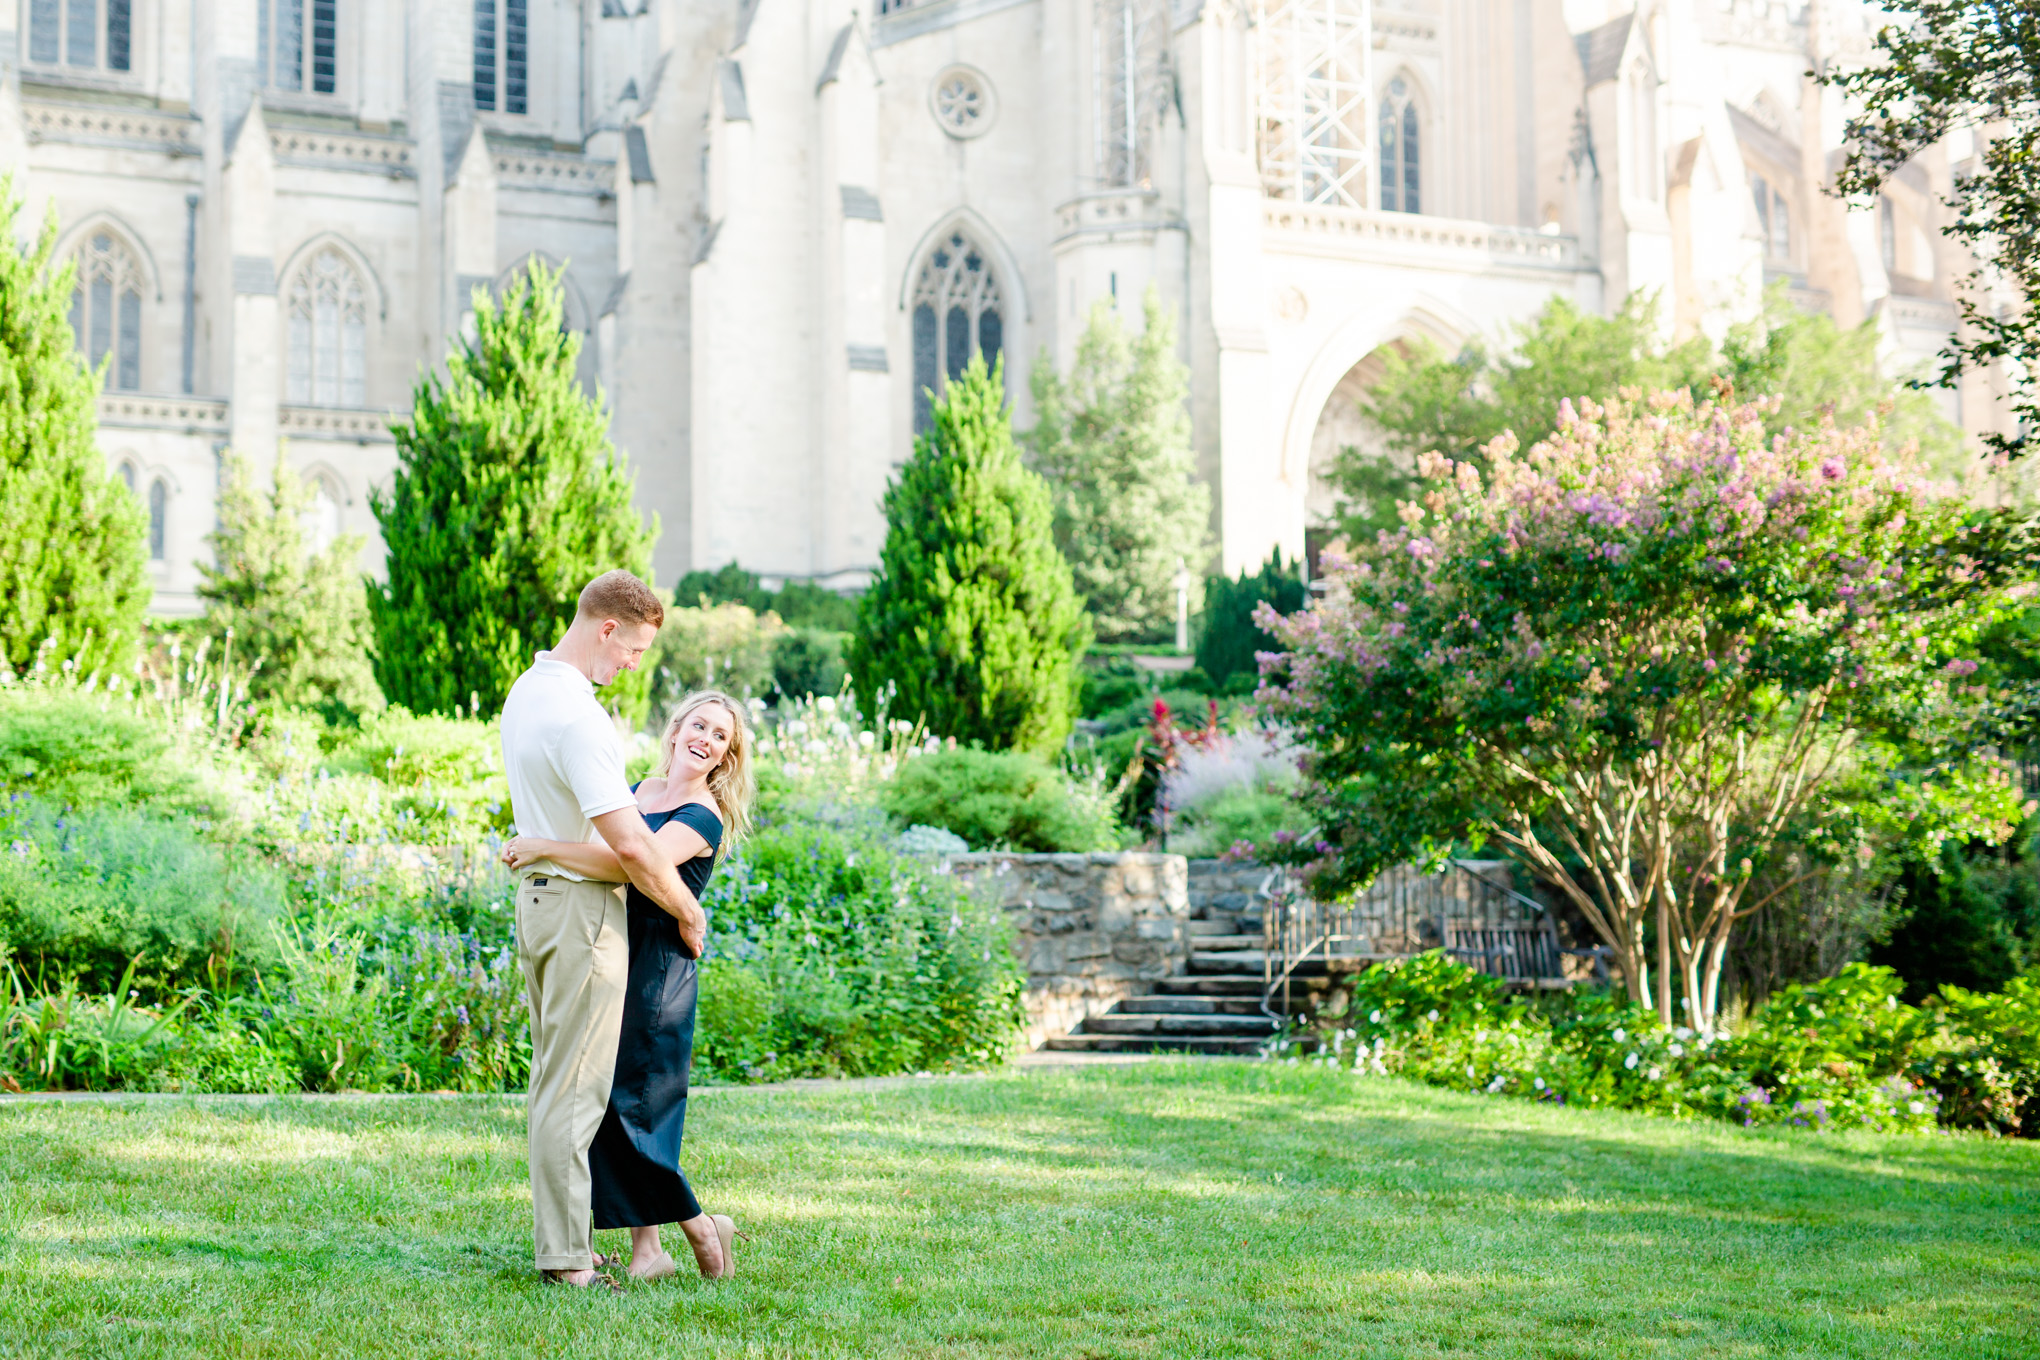 National Cathedral engagement photos, National Cathedral, D.C. engagement photos, classic engagement portraits, Washington National Cathedral, natural light engagement photos, D.C. engagement photographer, Rachel E.H. Photography, sunrise engagement photos, couple laughing in garden